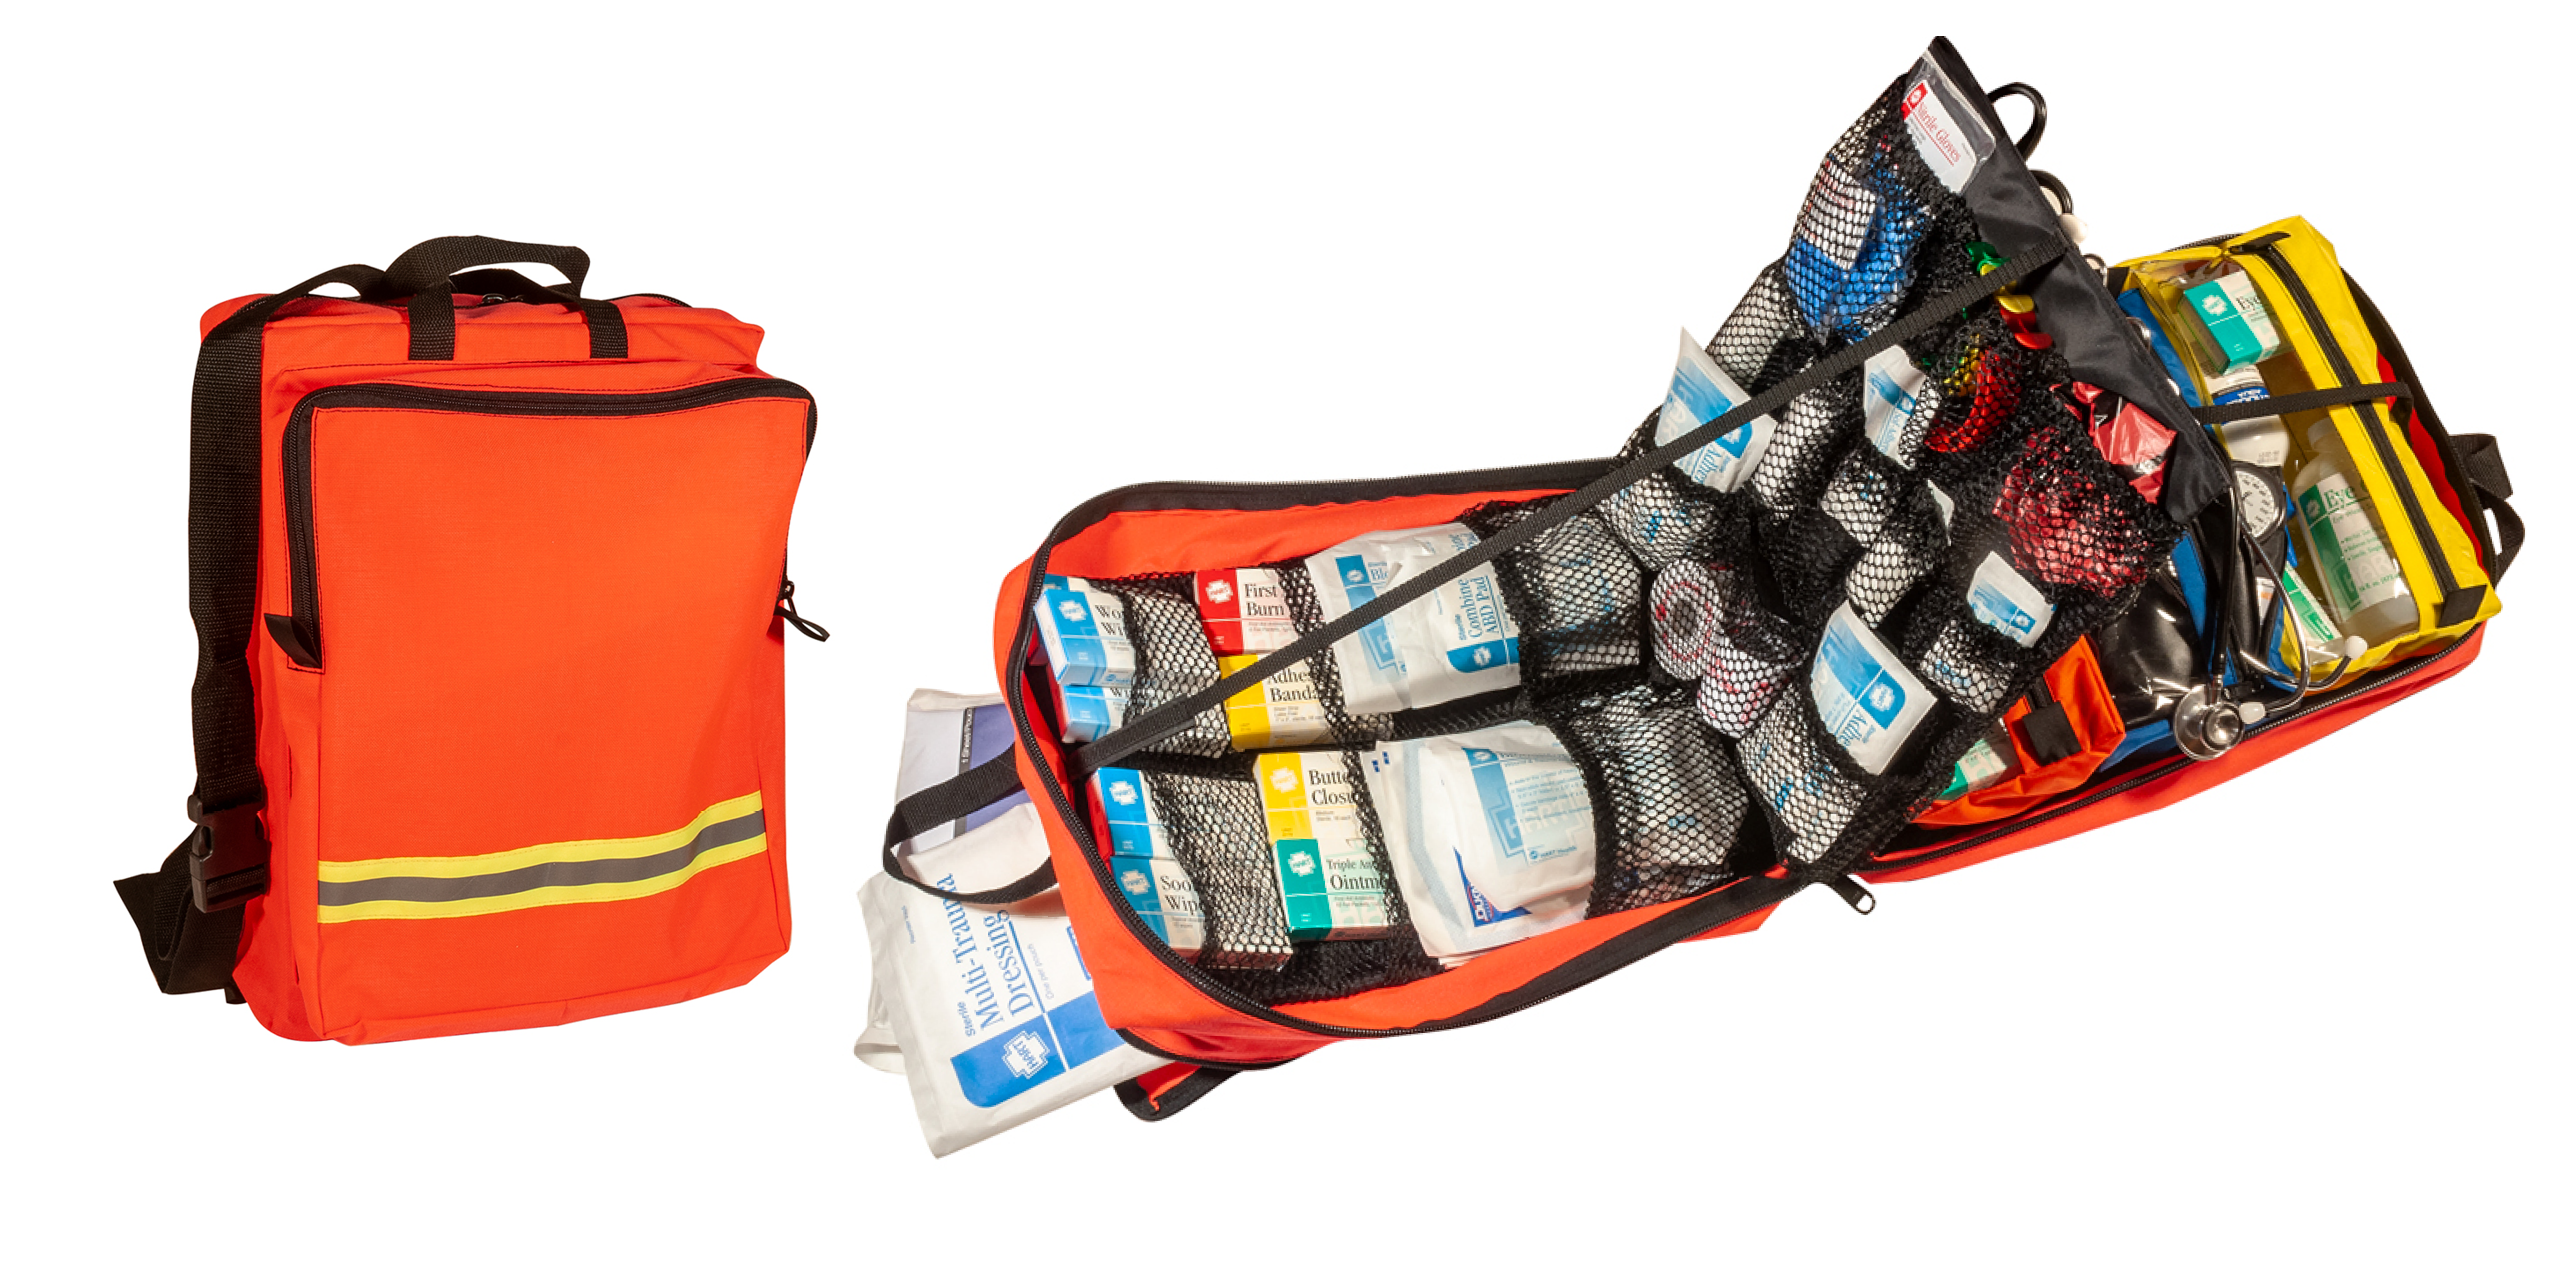 Our Trauma Kits Have What You Need for Every Emergency Scenario